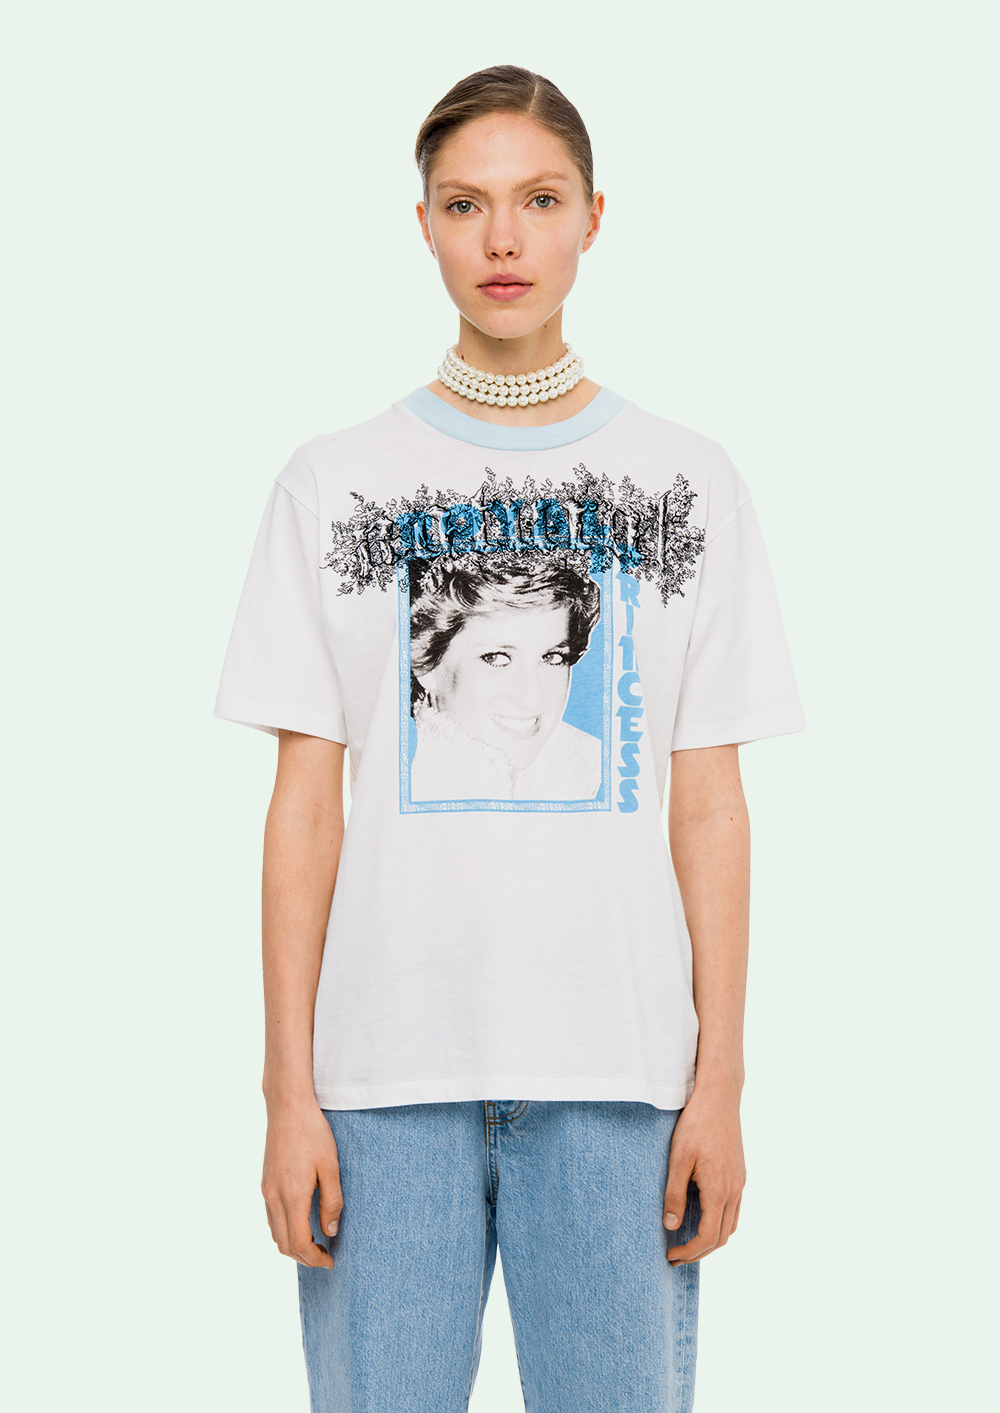 Off-White Princess Diana Tribute T-Shirt Now Available For Pre-Order